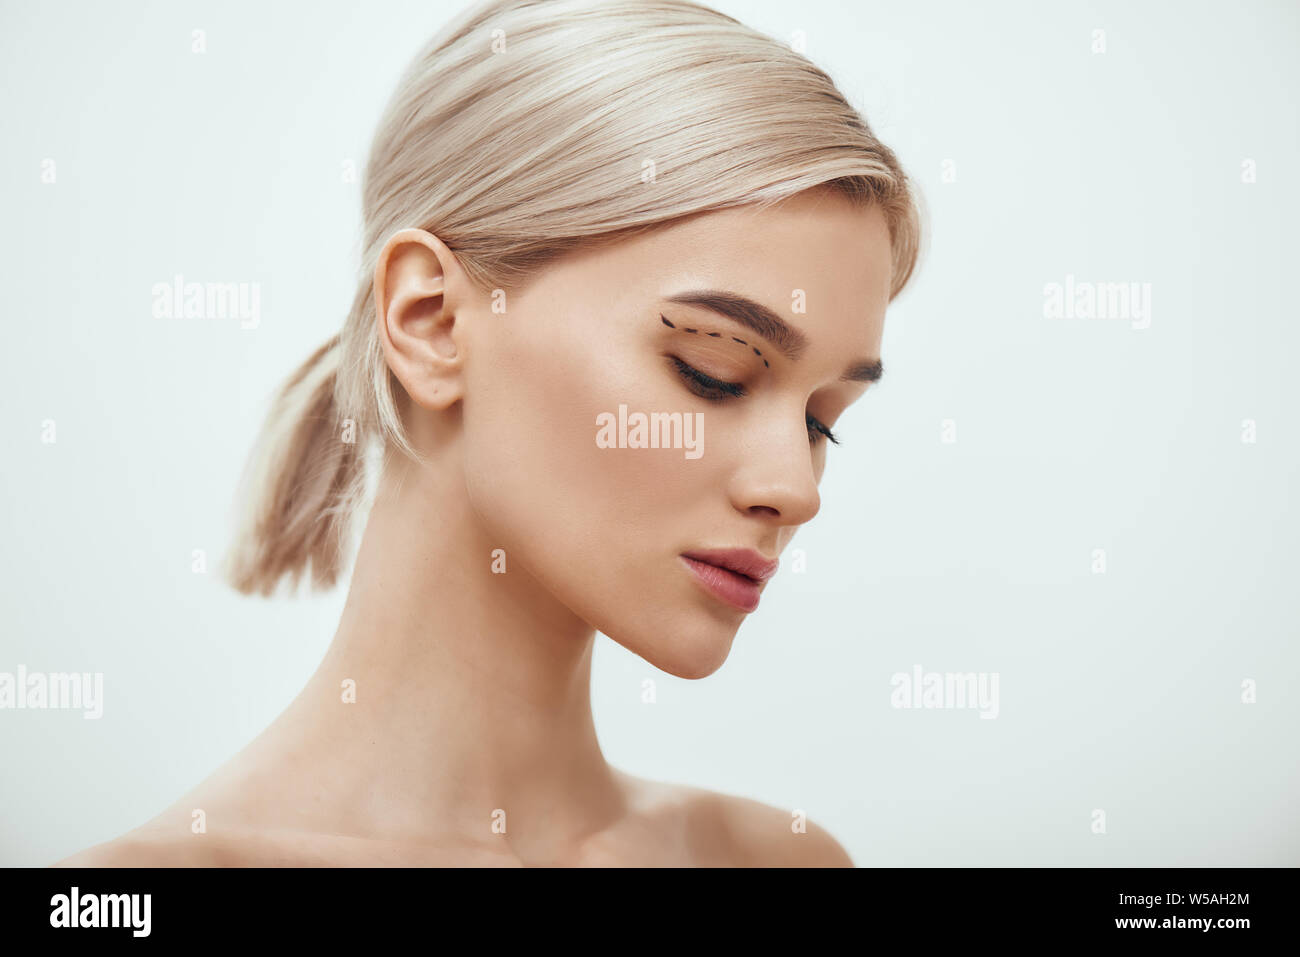 Before facial surgery. Side view of pretty young blonde woman with sketch on her face standing against grey background. Plastic surgery concept. Healthcare. Beauty concept. Stock Photo